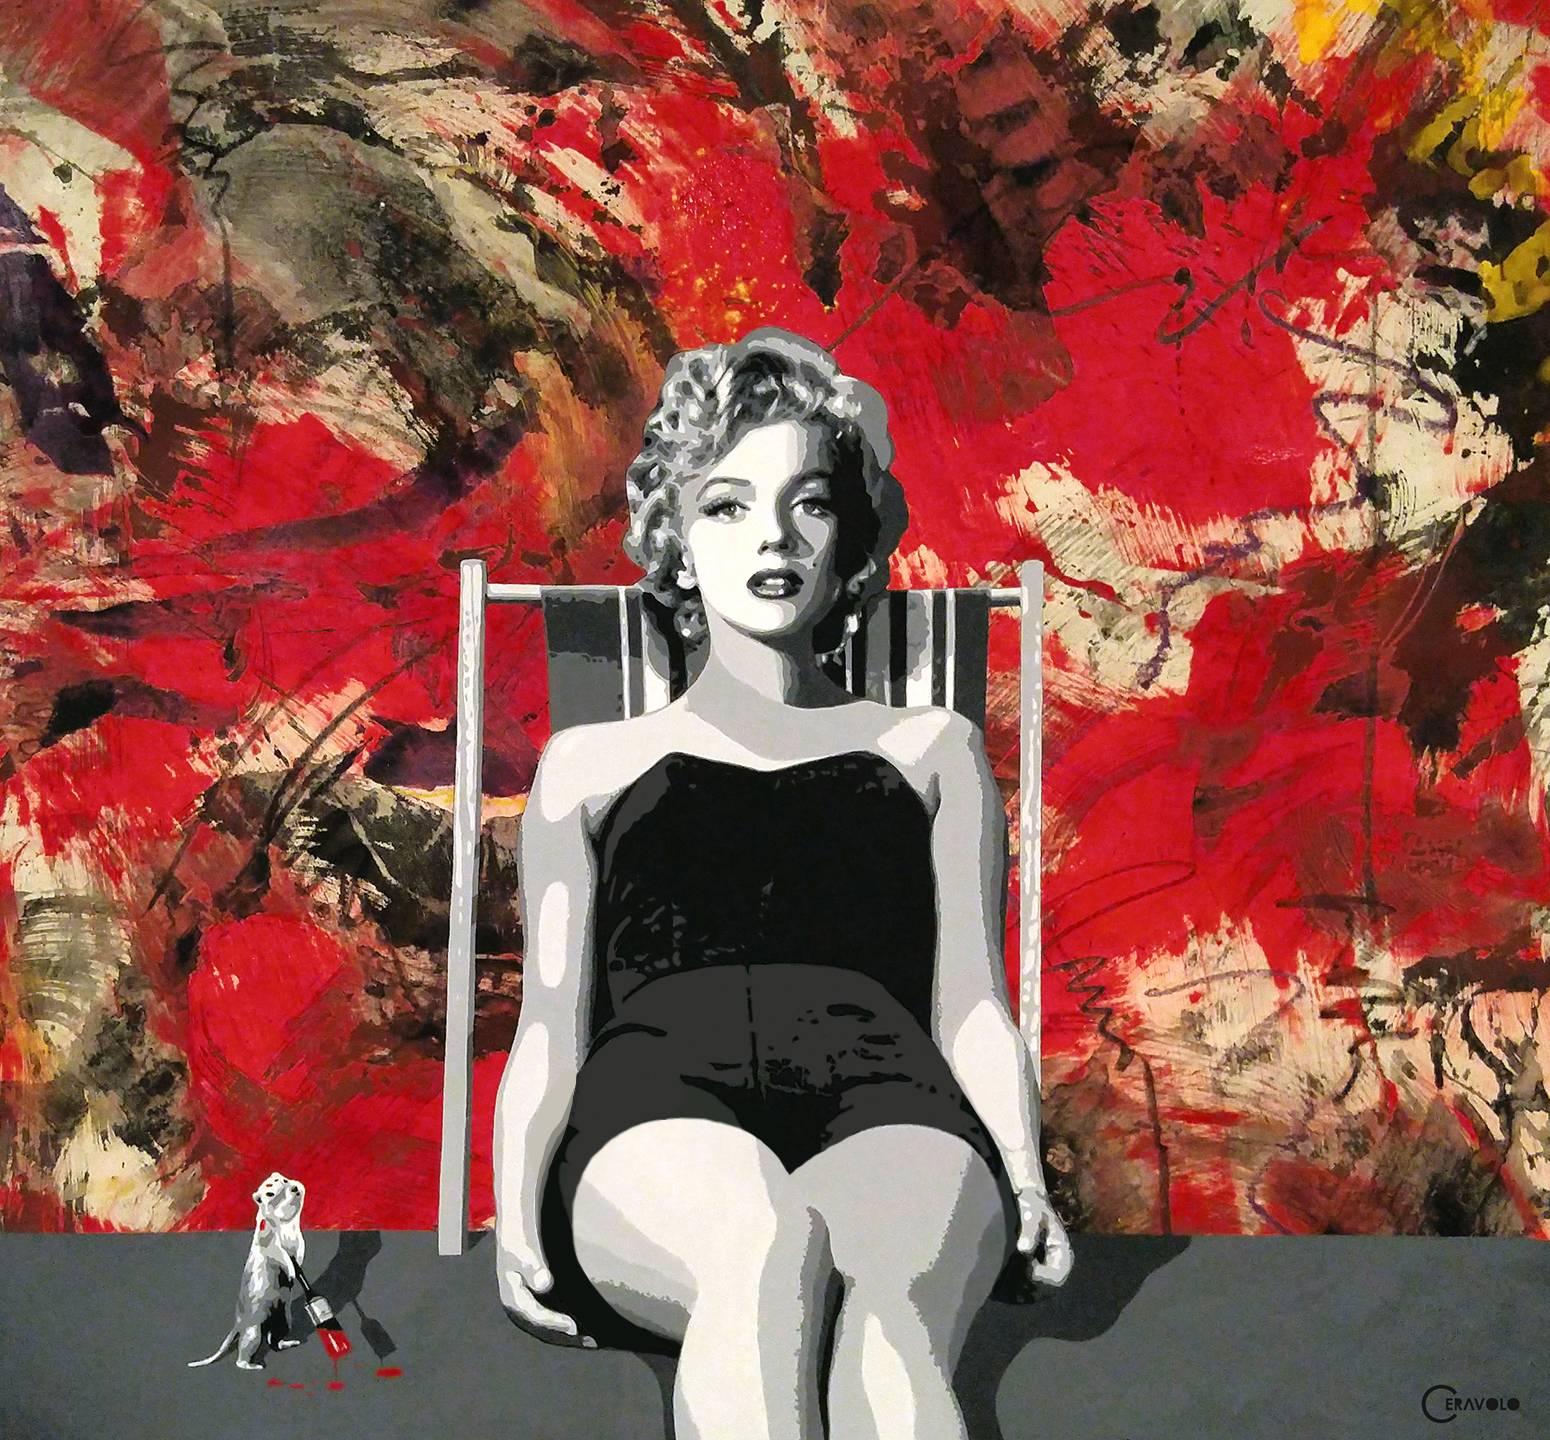 Ceravolo Abstract Painting - Painting the Town Red with Marilyn,  56x62, 